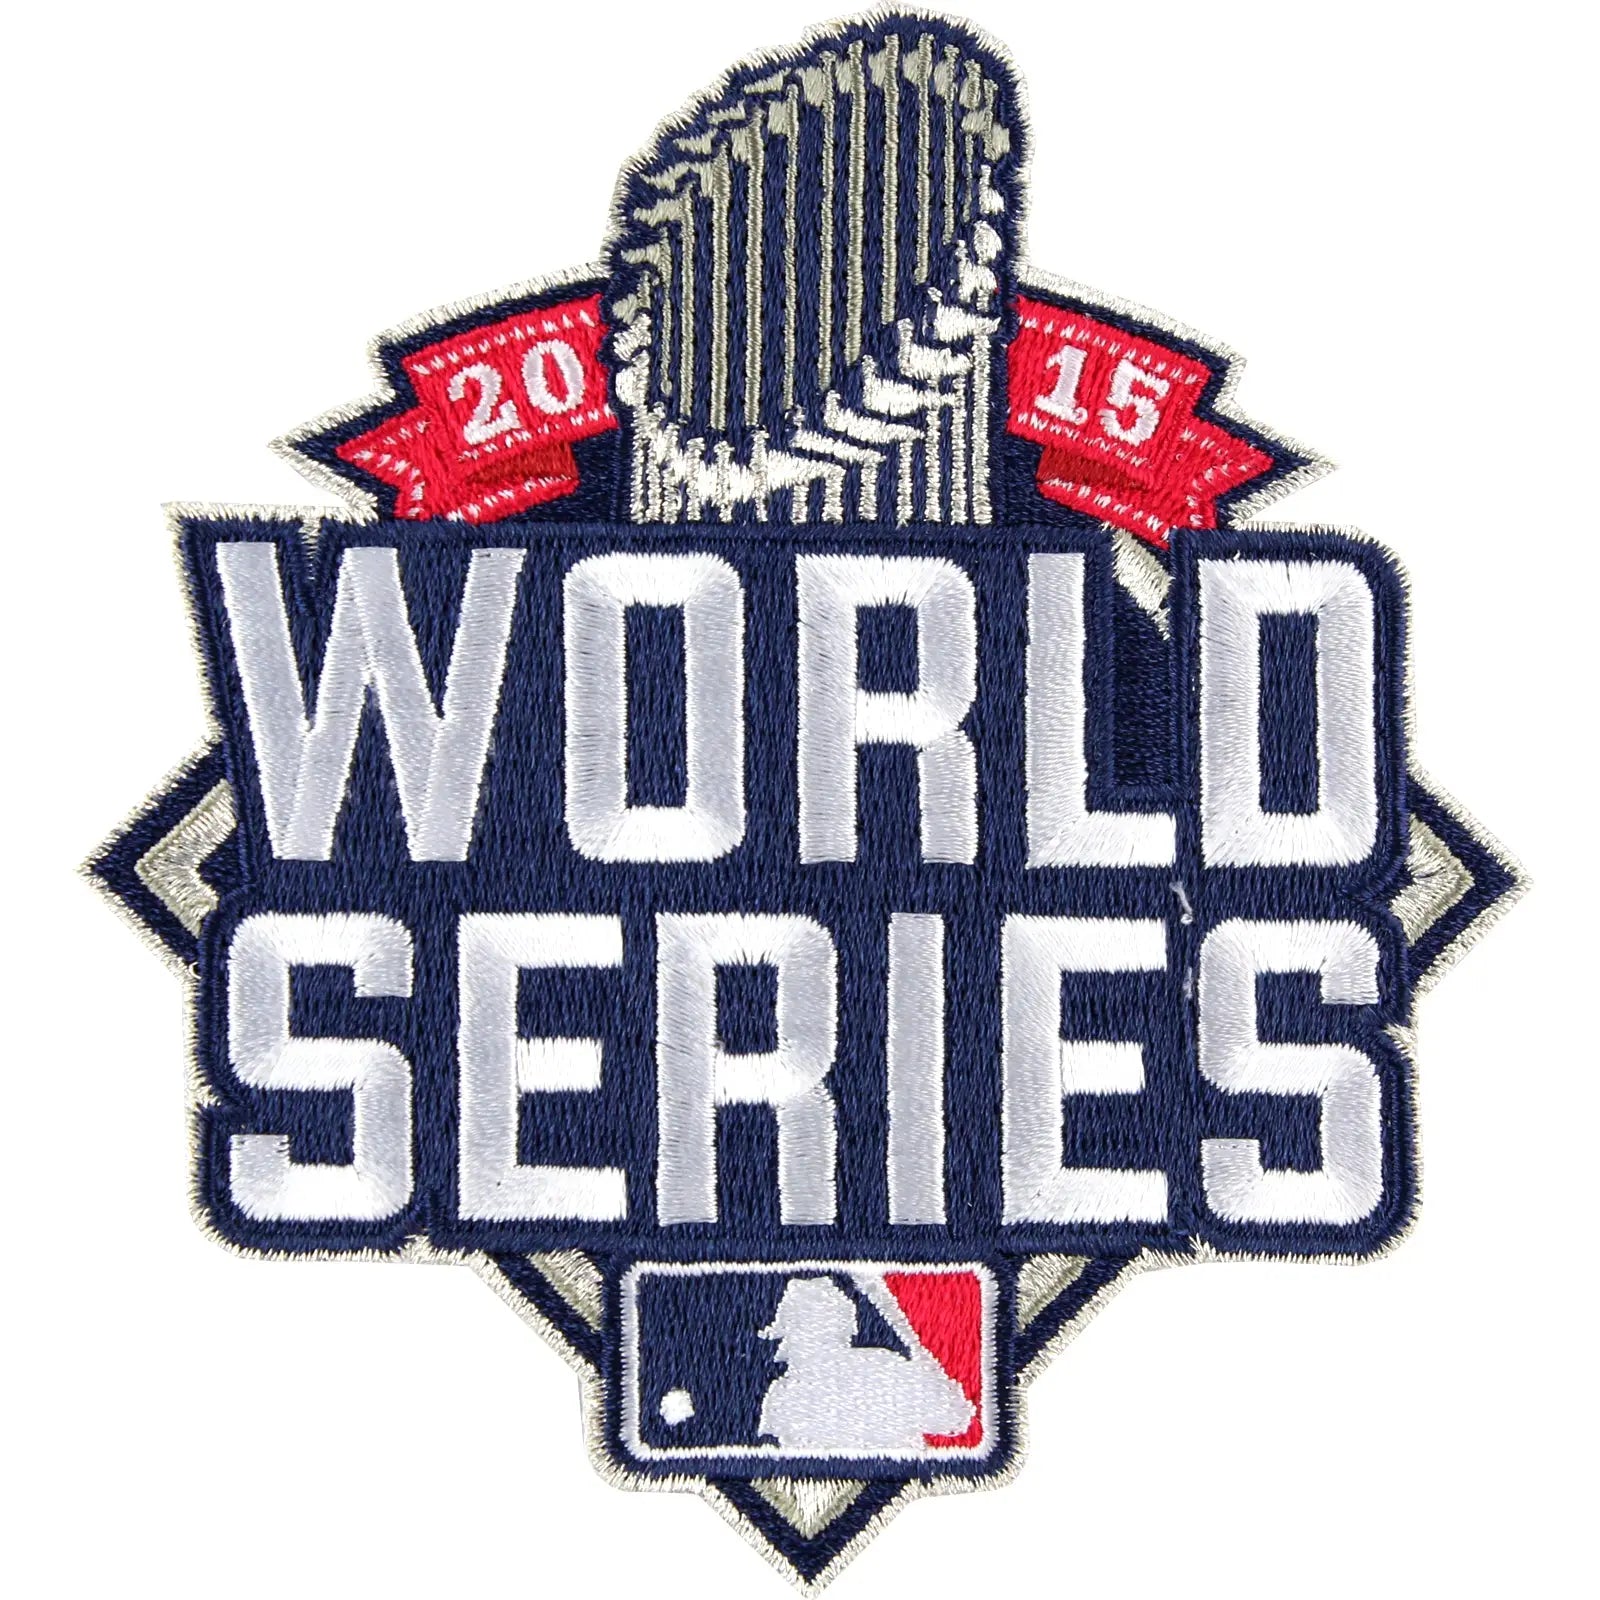 I stumbled upon the vector files for the 2015 World Series logo. I